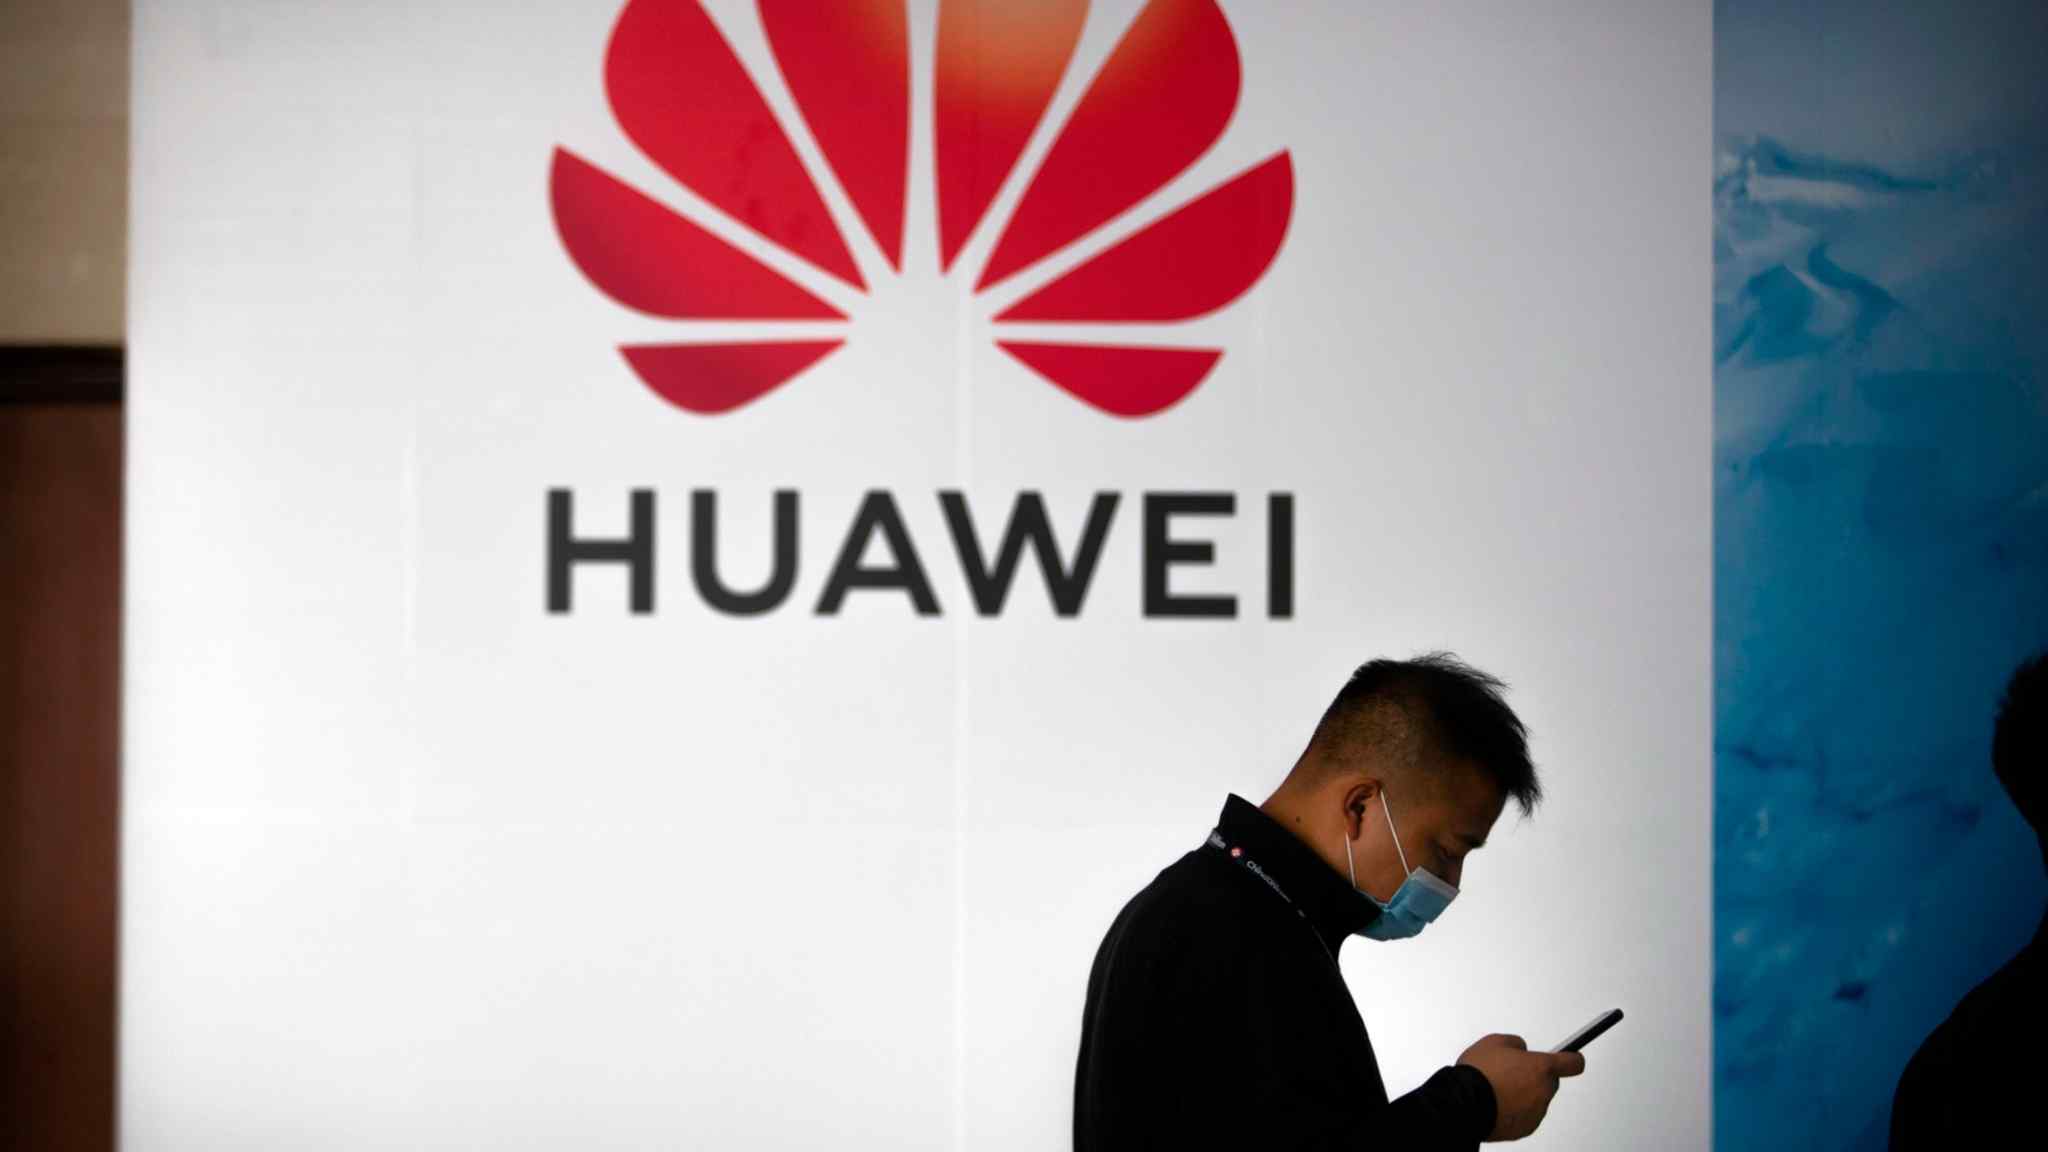 Huawei/ZTE: poor US-Saudi relations offer window for telecoms groups